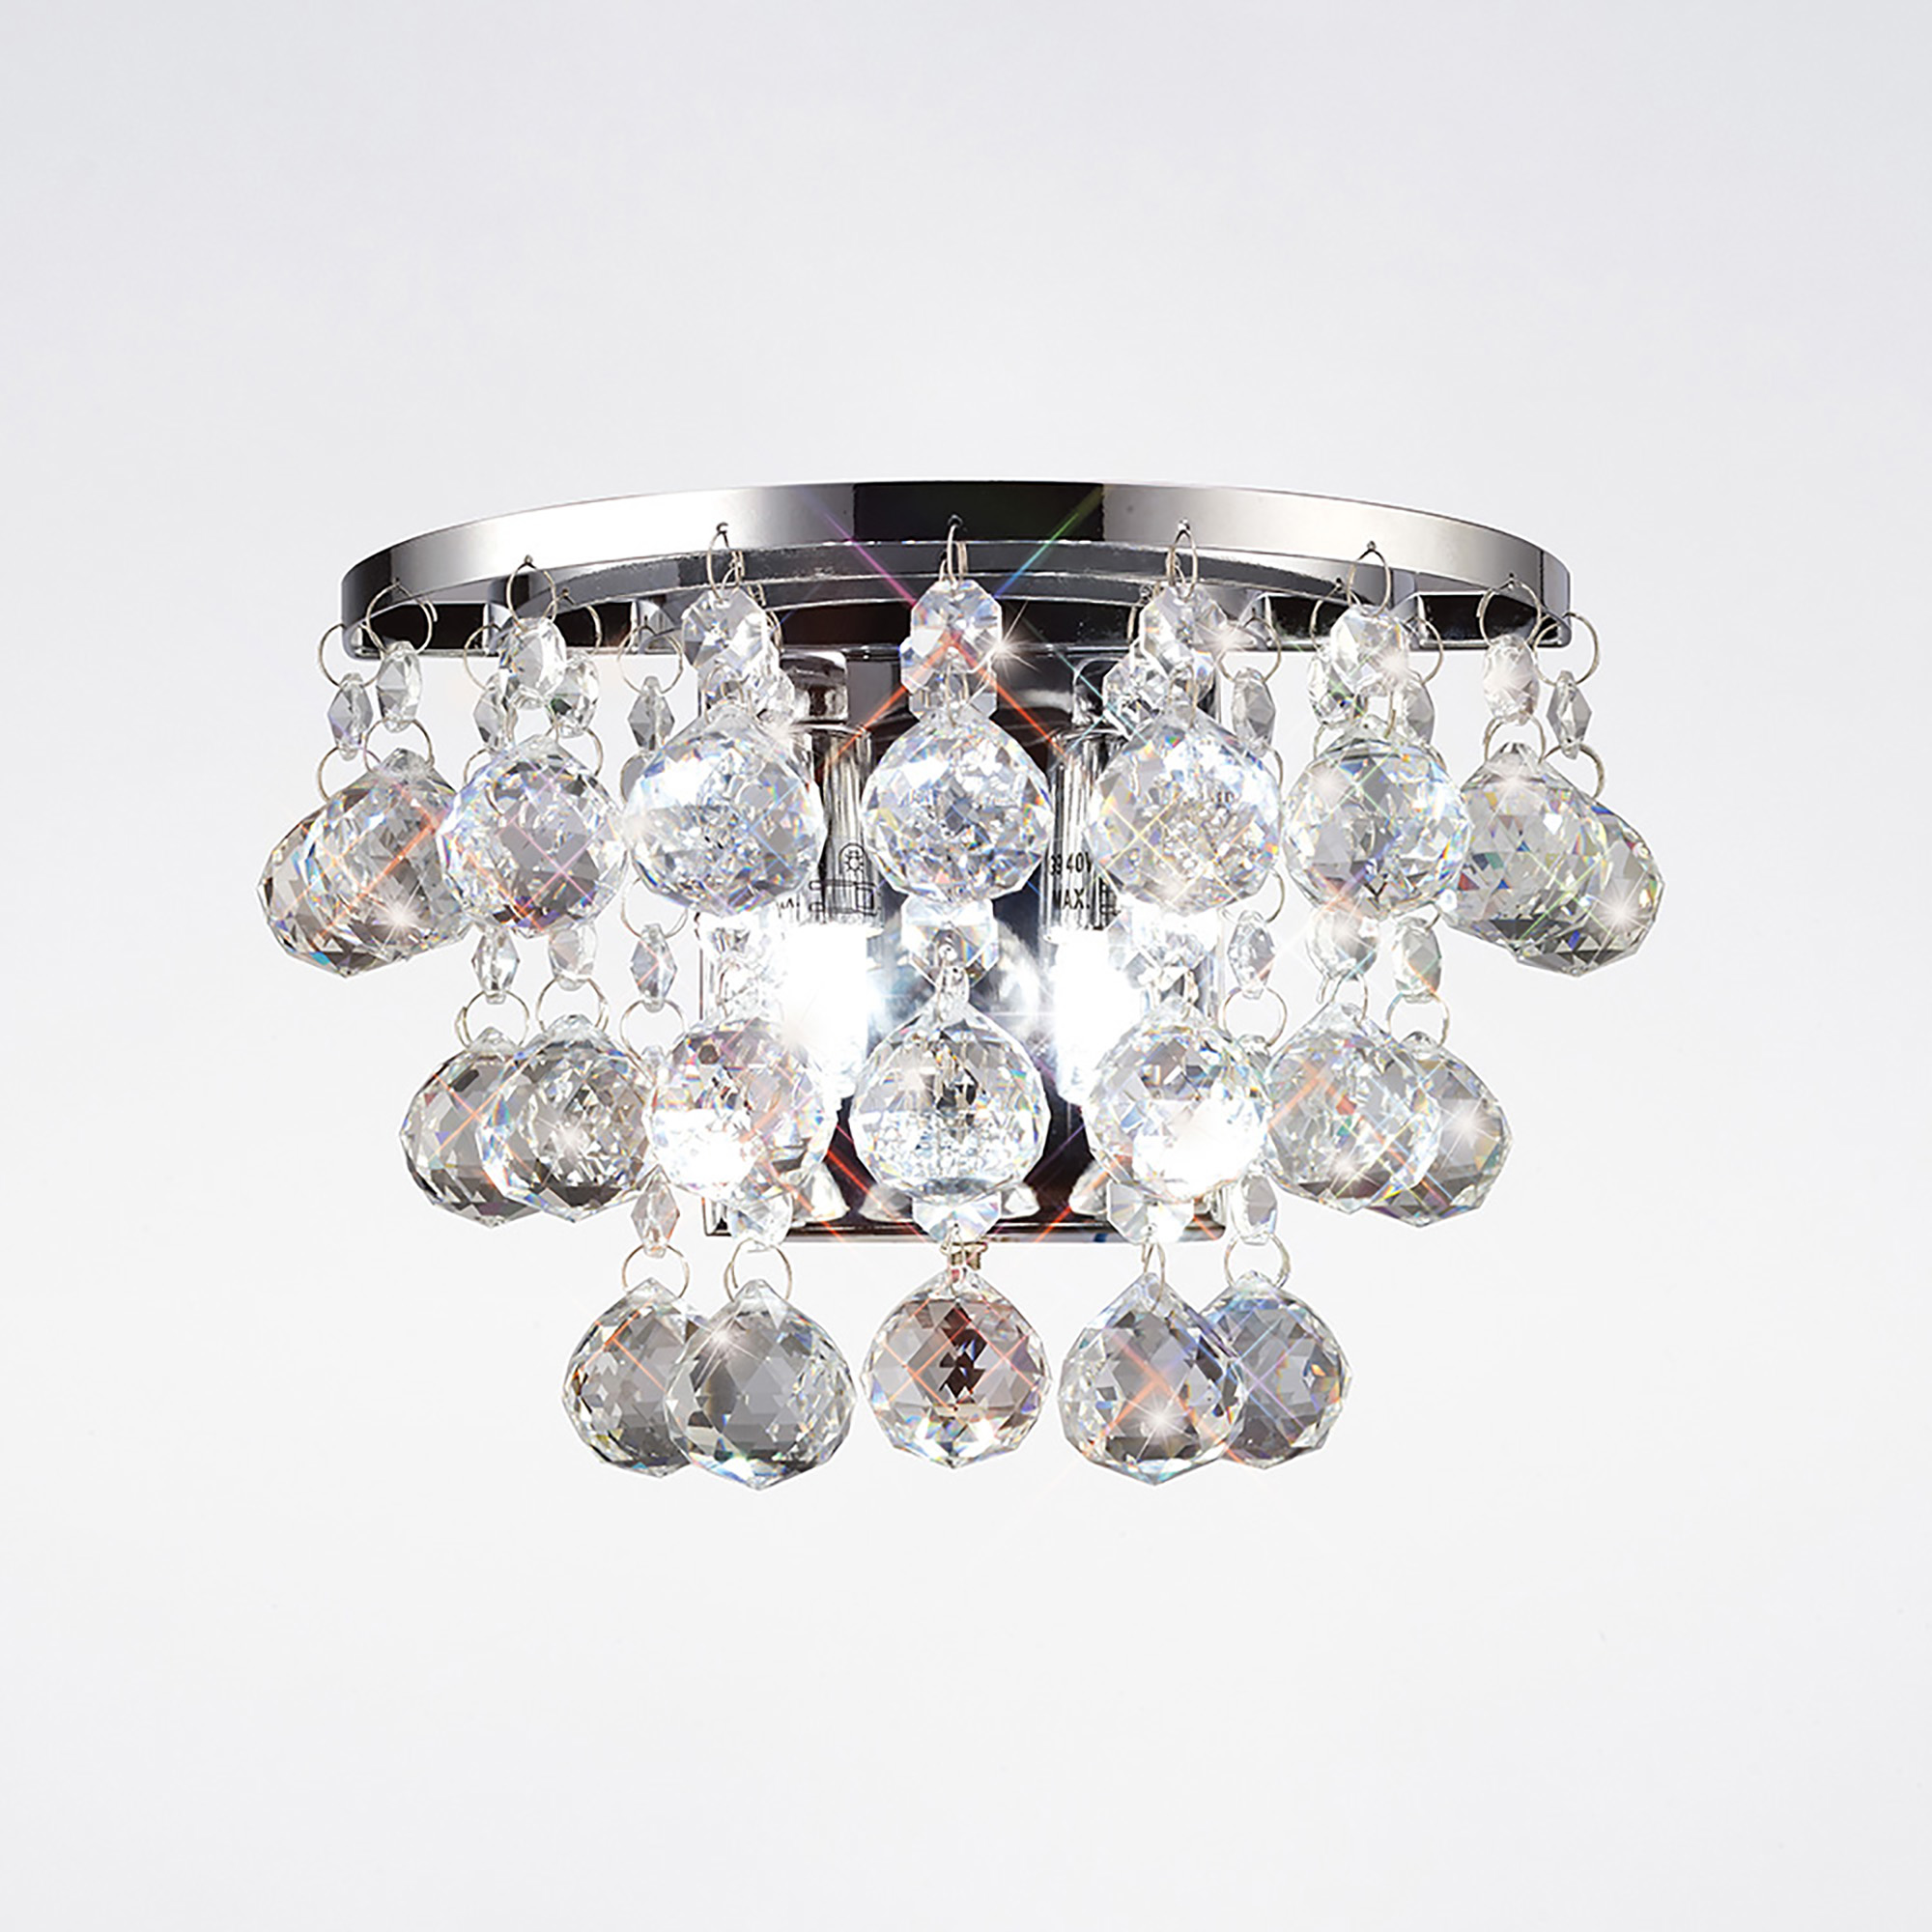 IL30014  Atla Crystal Switched Wall Lamp 2 Light